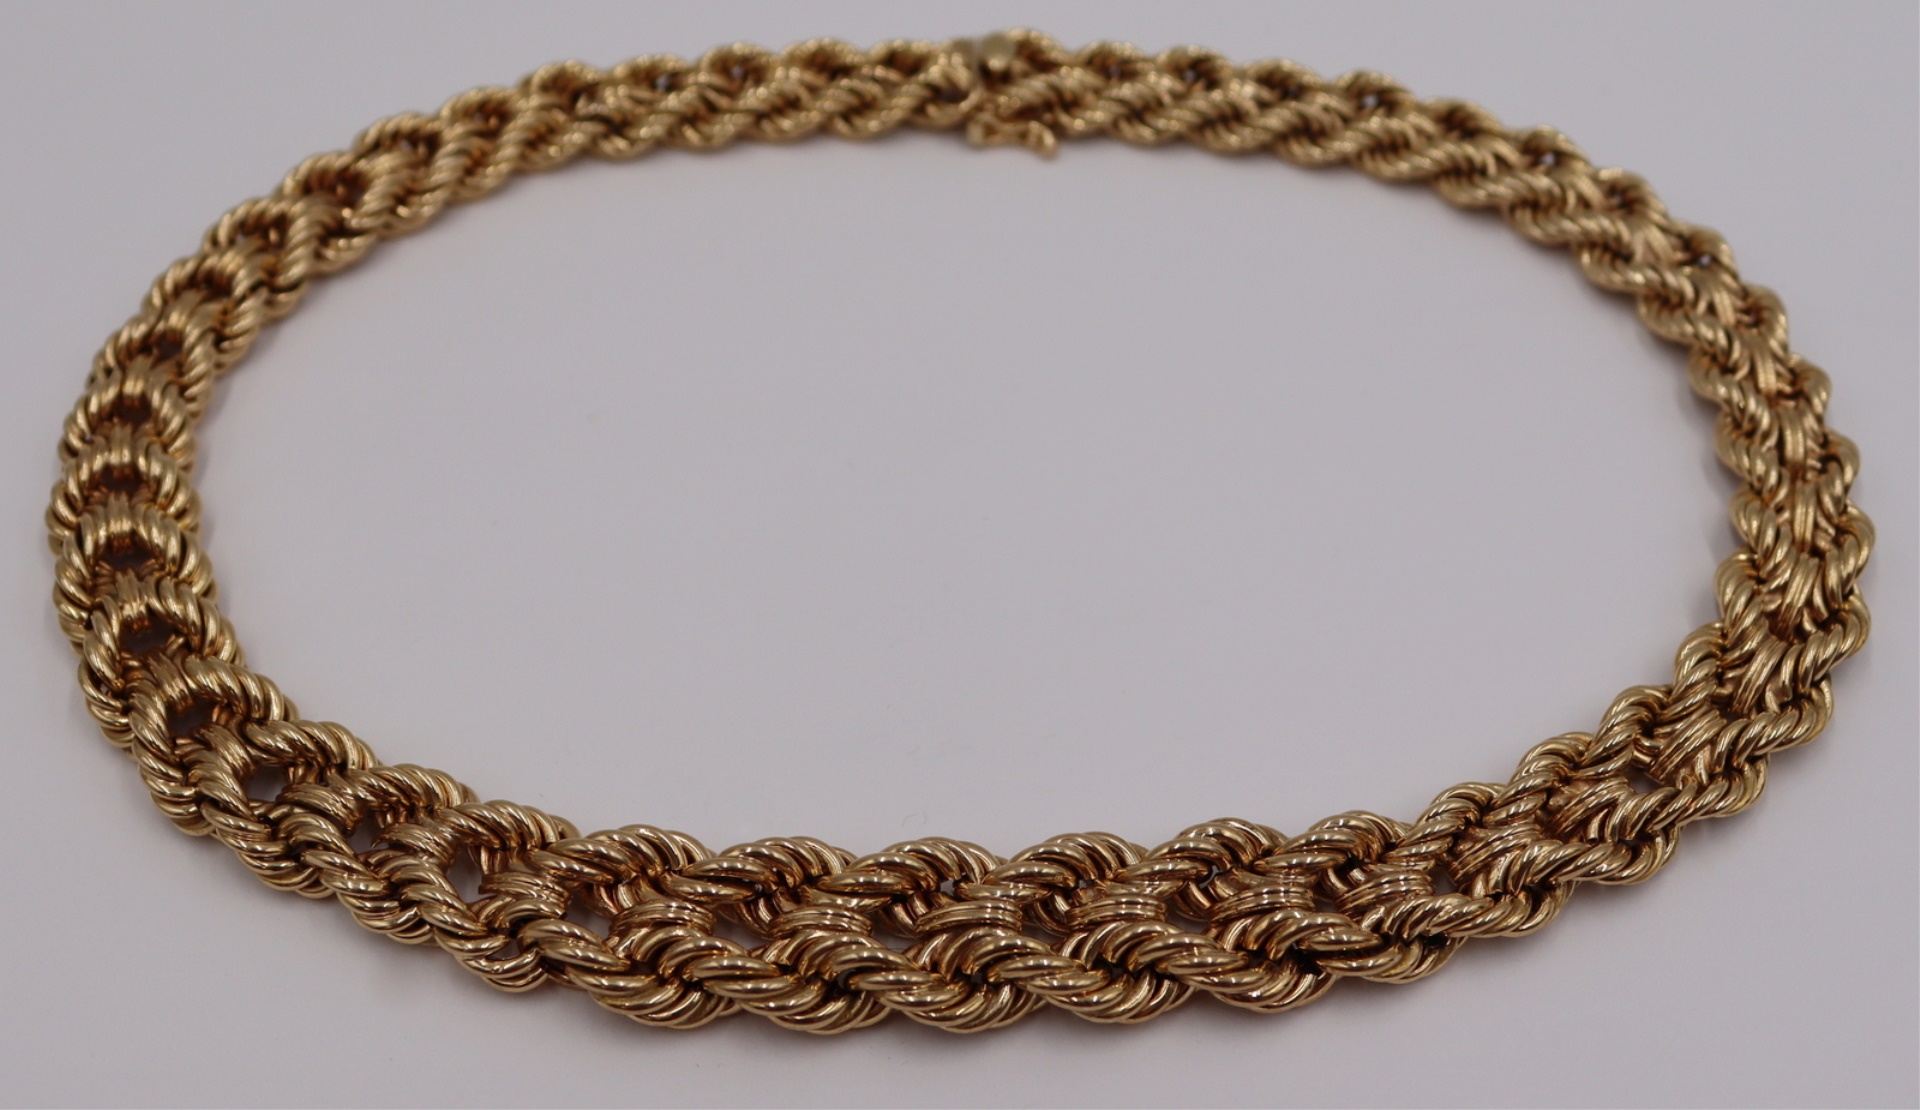 JEWELRY. 14KT GOLD GRADUATED WOVEN